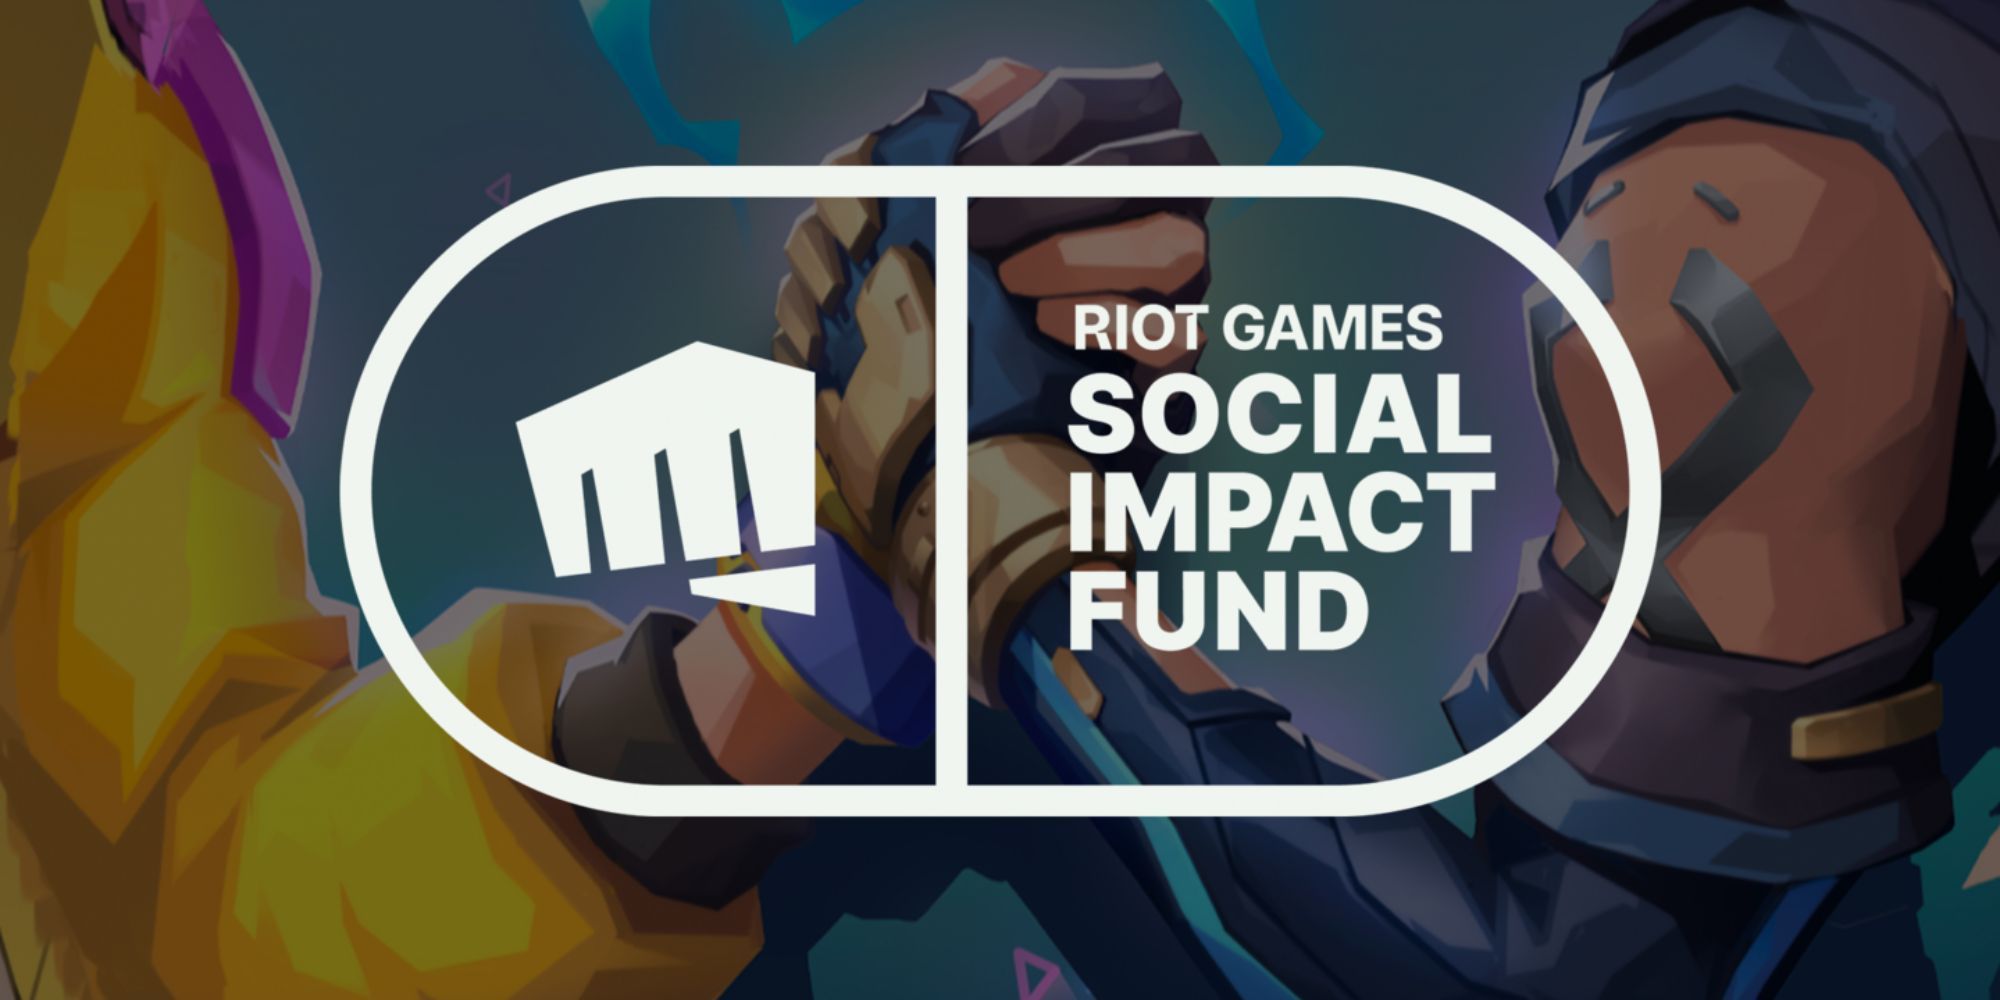 Riot Games Social Impact Fund in the foreground, two Valorant Agents holding hands in background